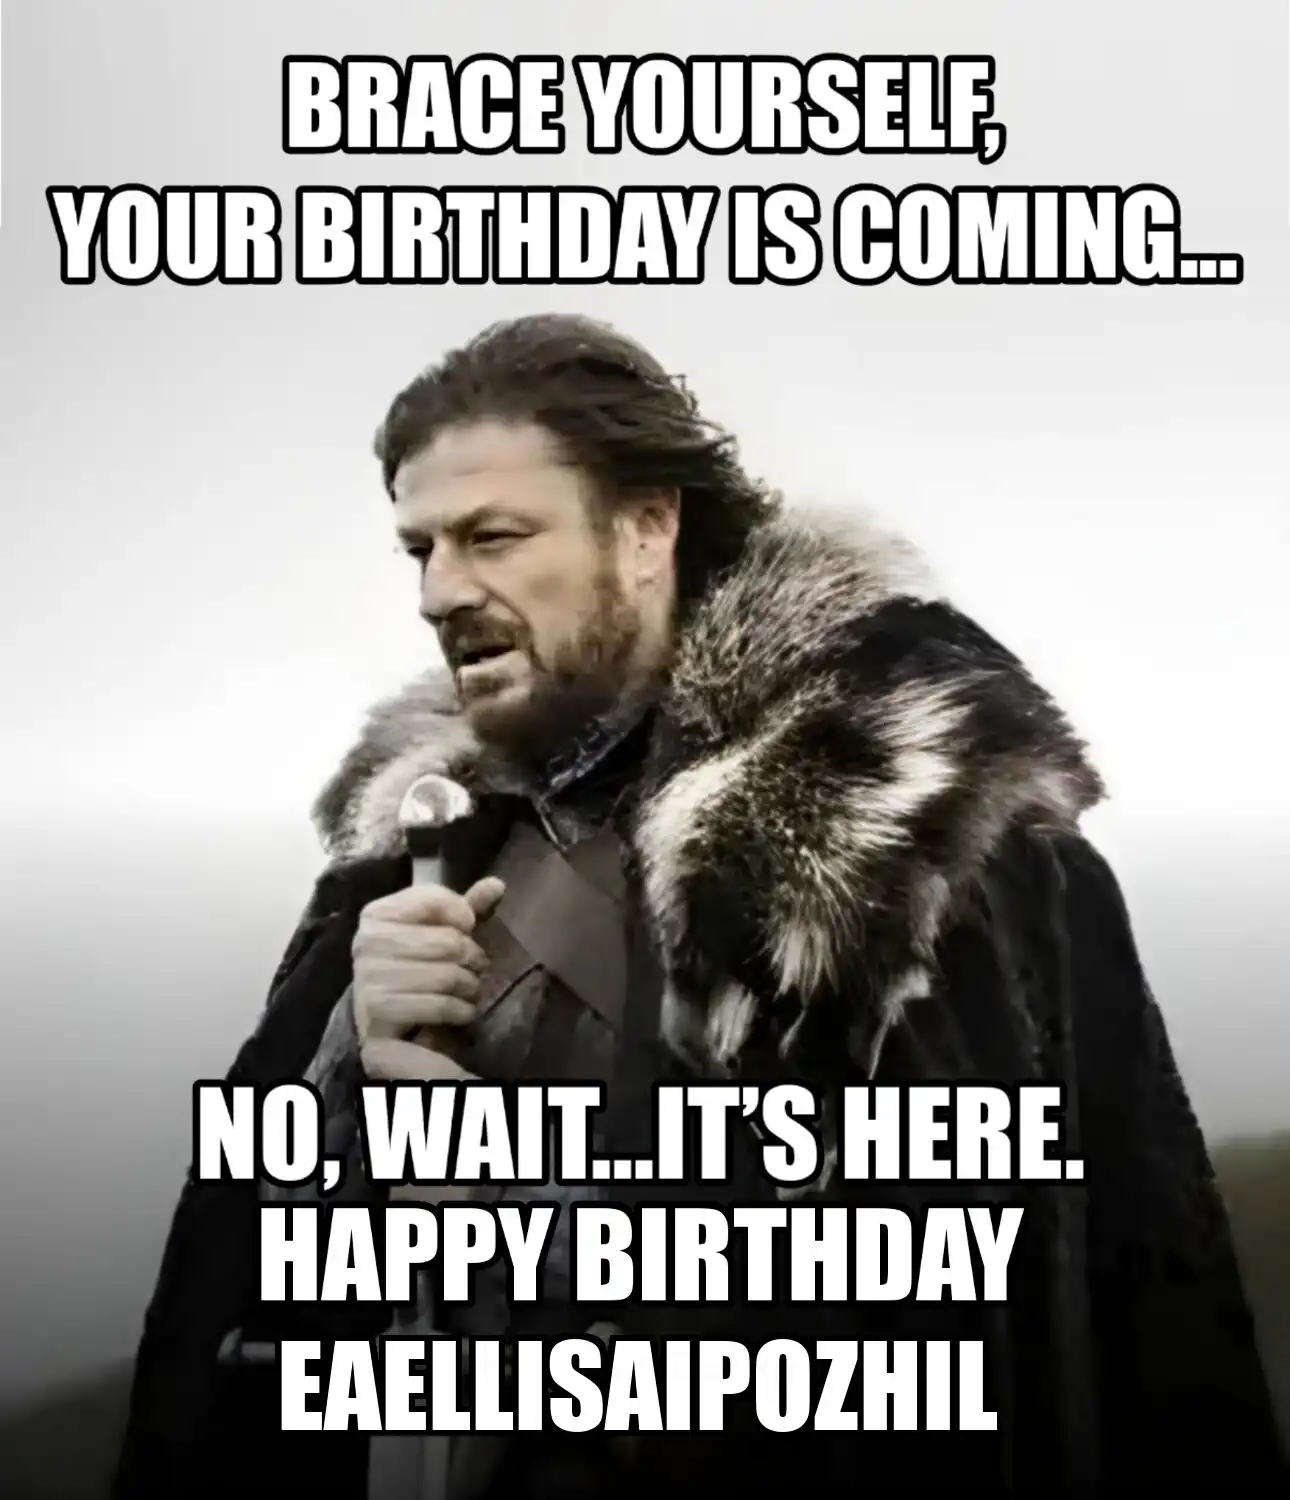 Happy Birthday Eaellisaipozhil Brace Yourself Your Birthday Is Coming Meme